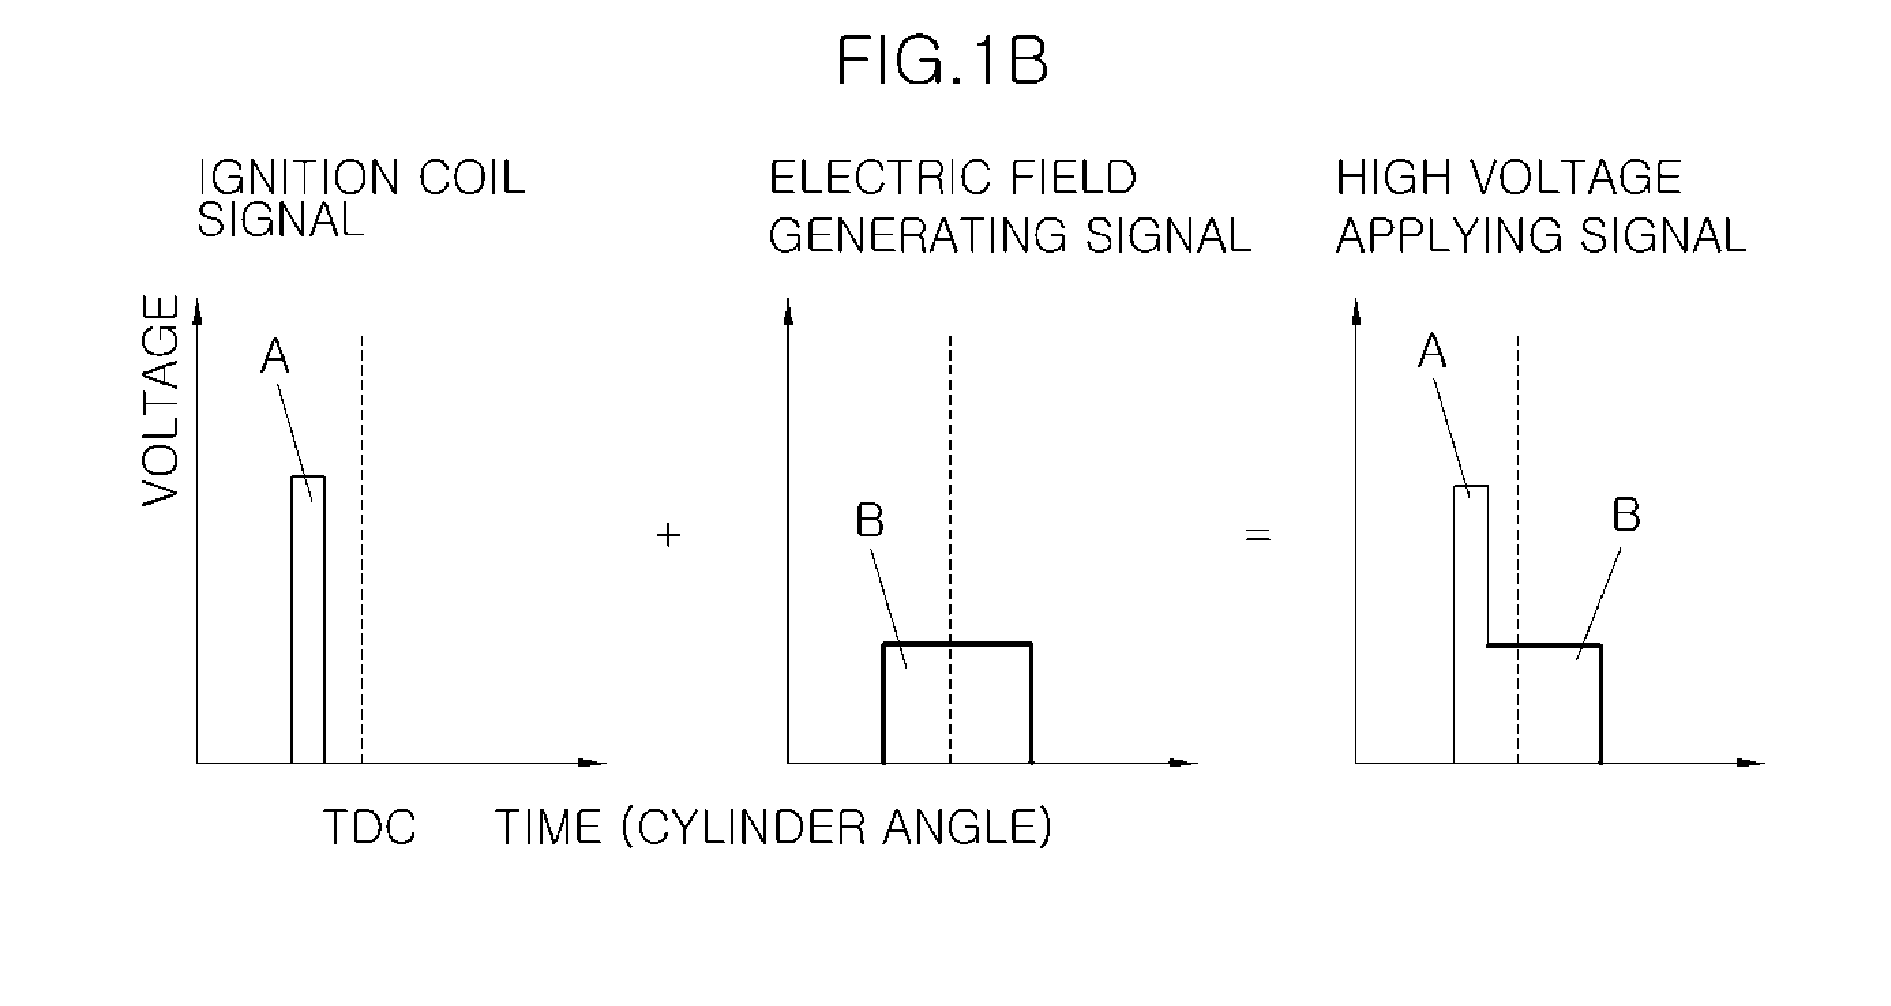 Electric field generating apparatus for combustion chamber